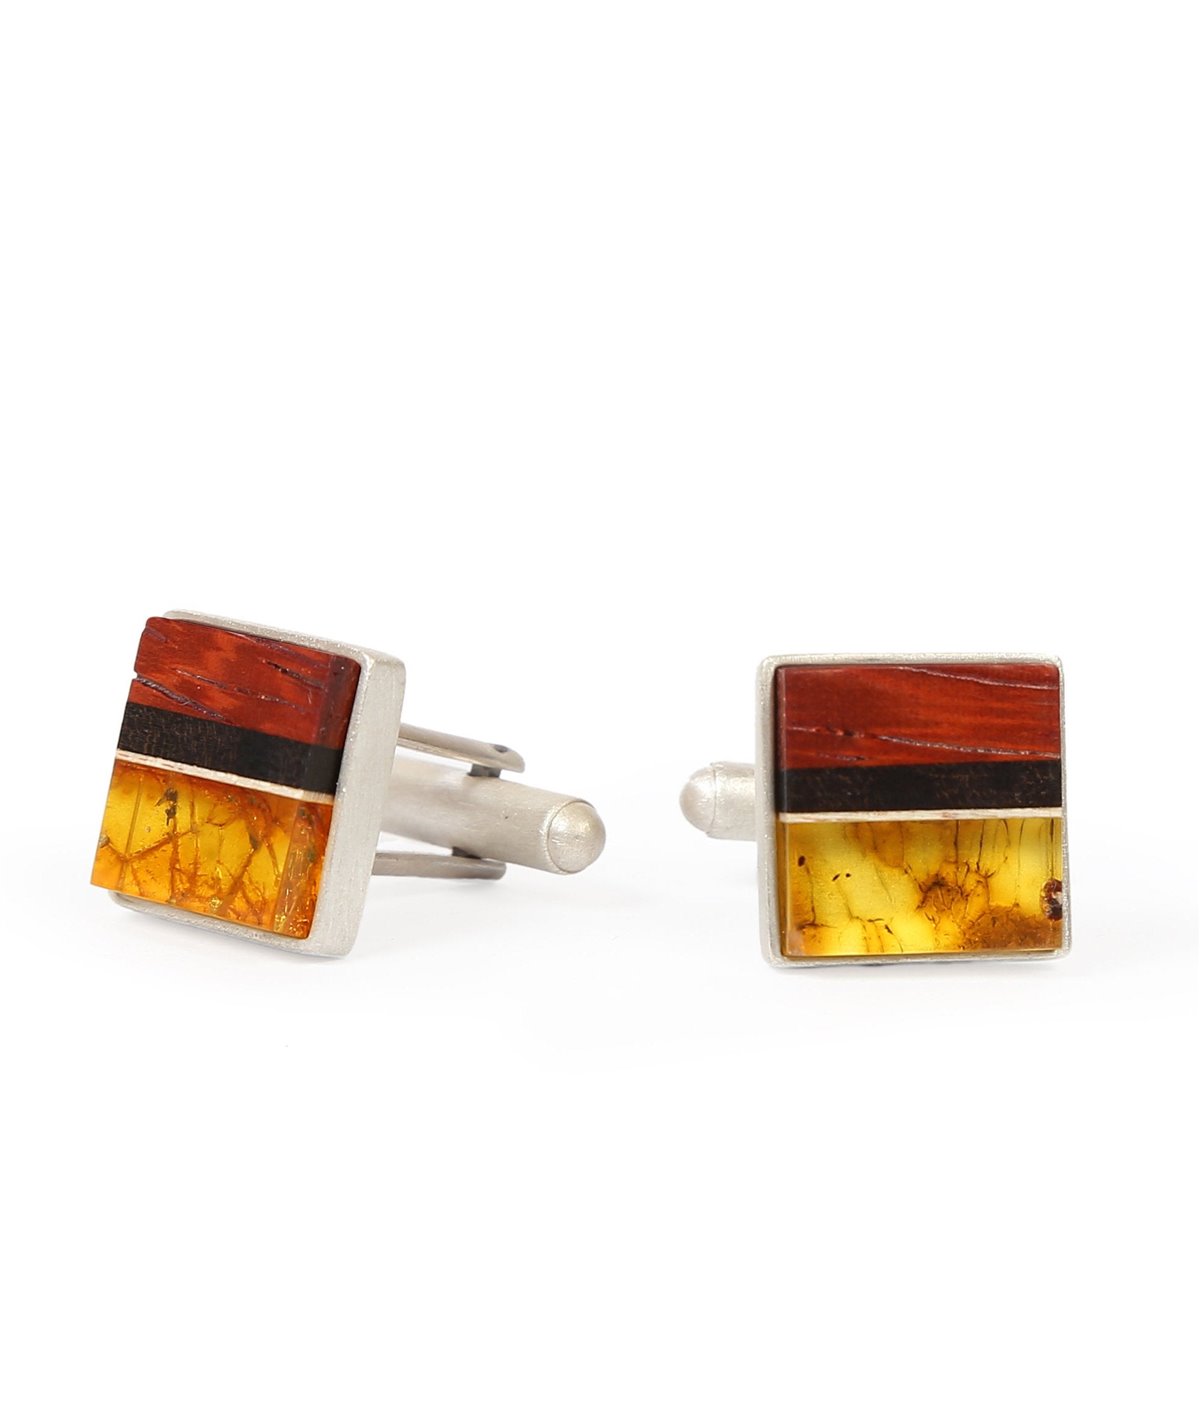 Cufflinks handmade from natural baltic amber, exotic red wood and sterling silver. Mens jewellery. 